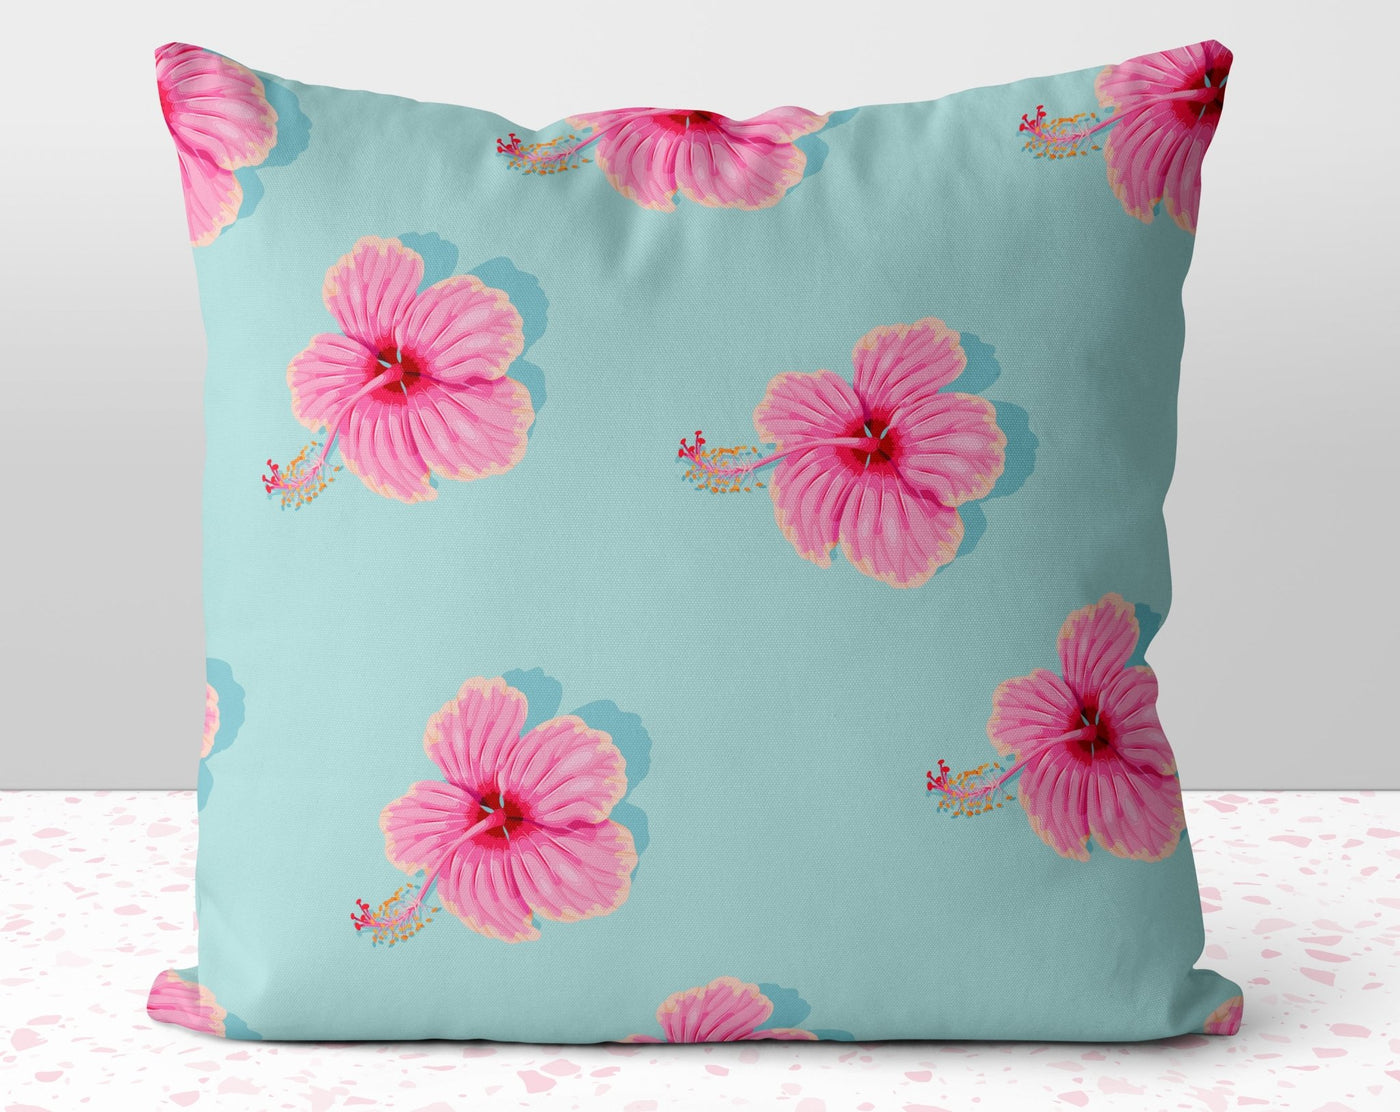 Summer Fun Teal Blue Square Pillow Cover Throw with Pink Floral Flower Accents - Cush Potato Pillows